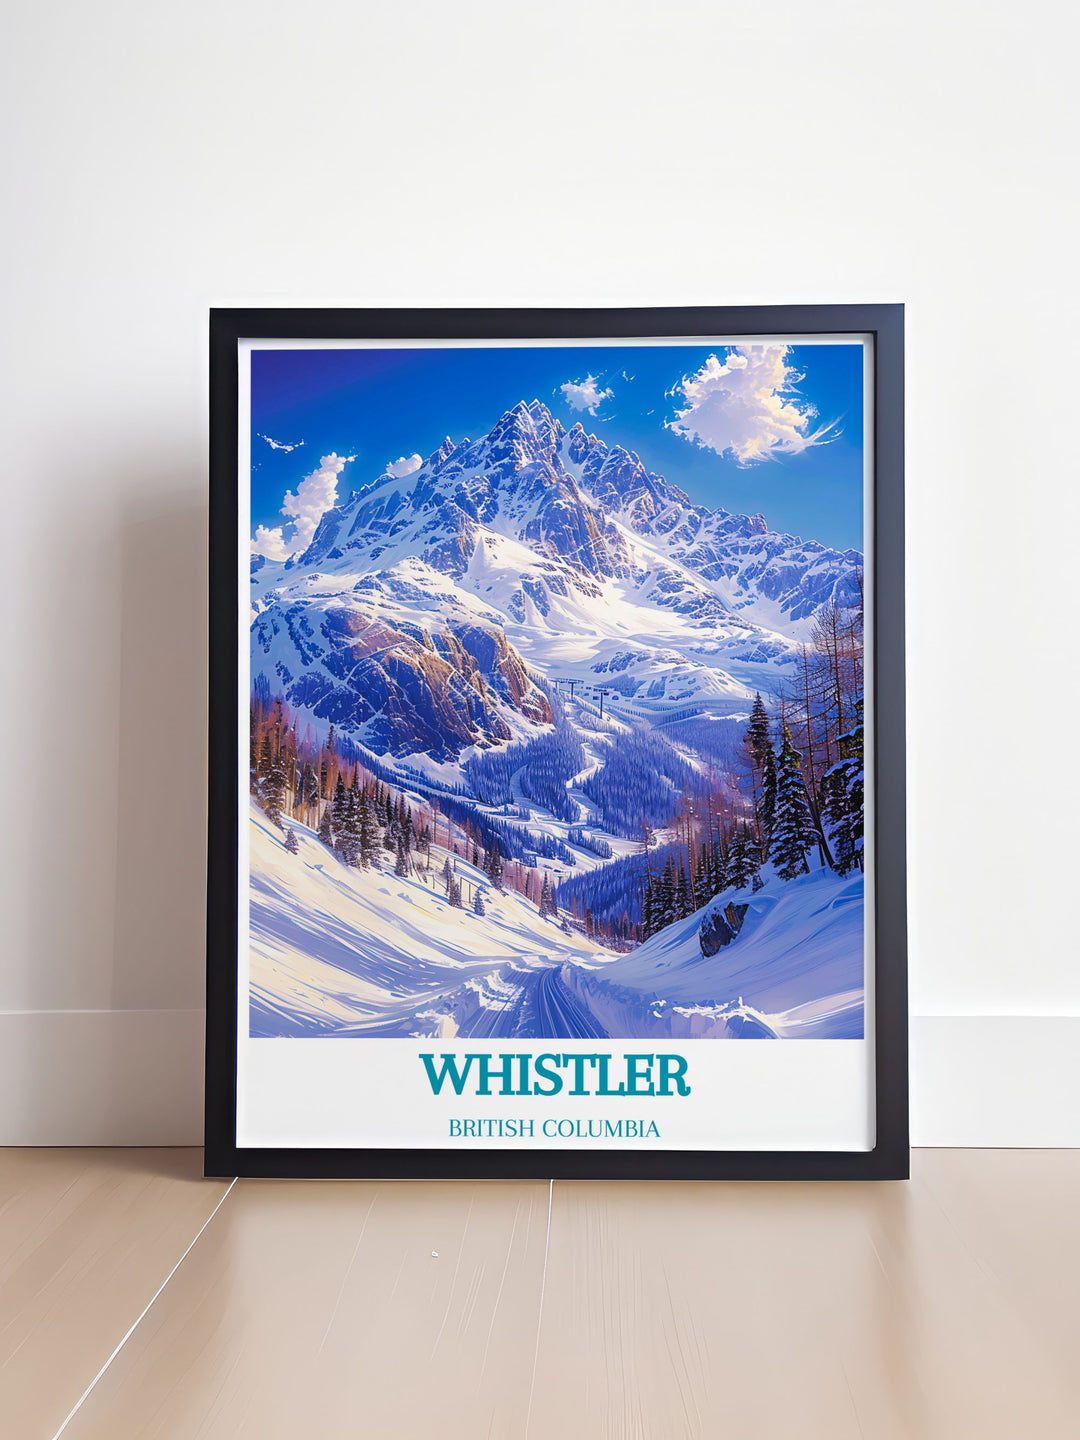 Beautiful home decor print capturing the vibrant charm of Whistler Village at the base of Whistler Blackcomb. This artwork brings the lively atmosphere and picturesque surroundings into any room, ideal for travel lovers.